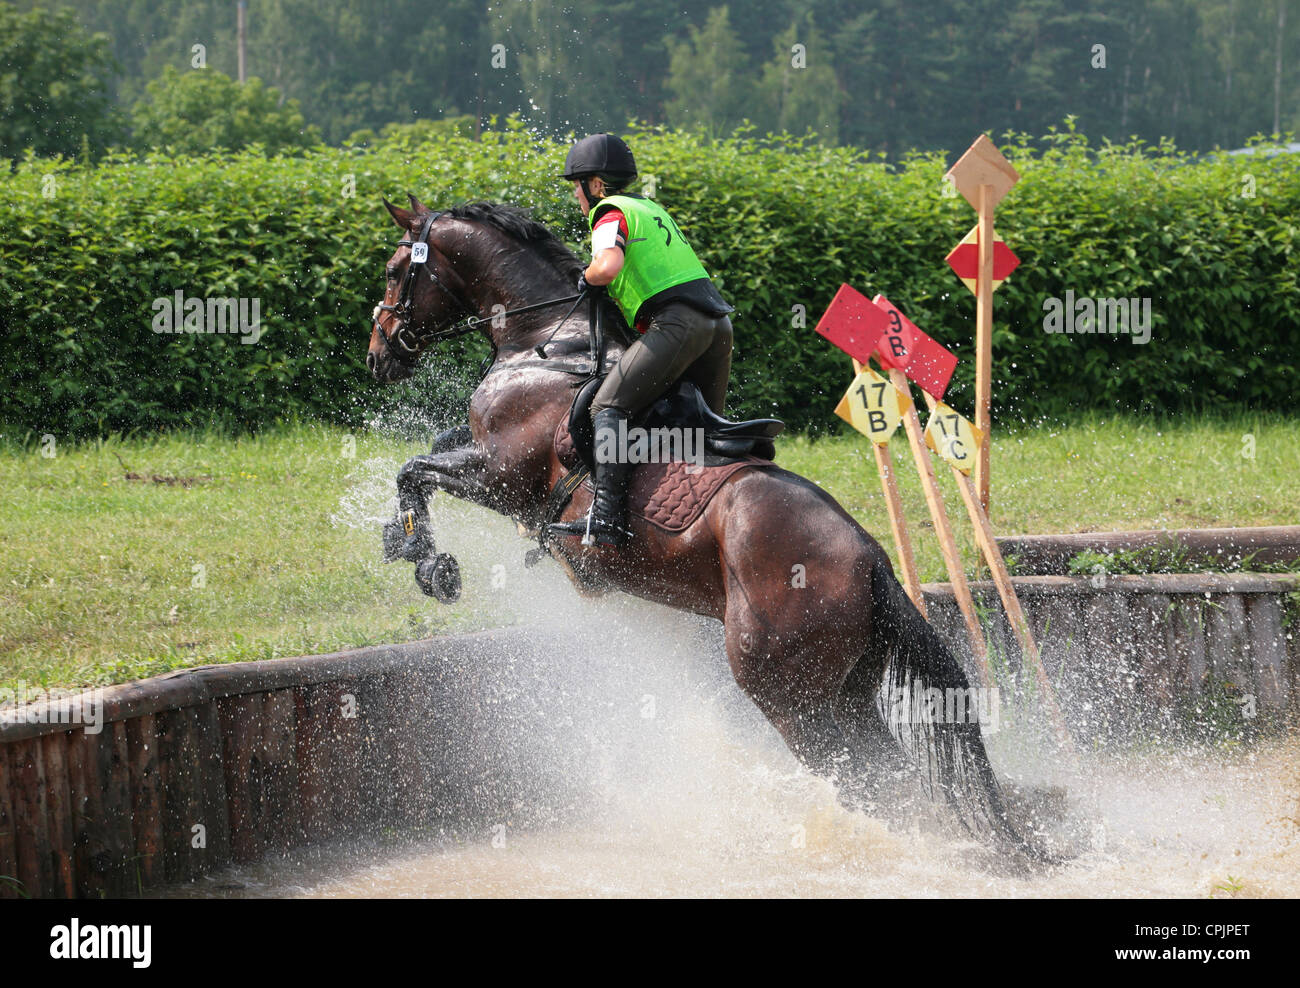 Horse rider jumps a water obstacle during a three day eventing Stock Photo